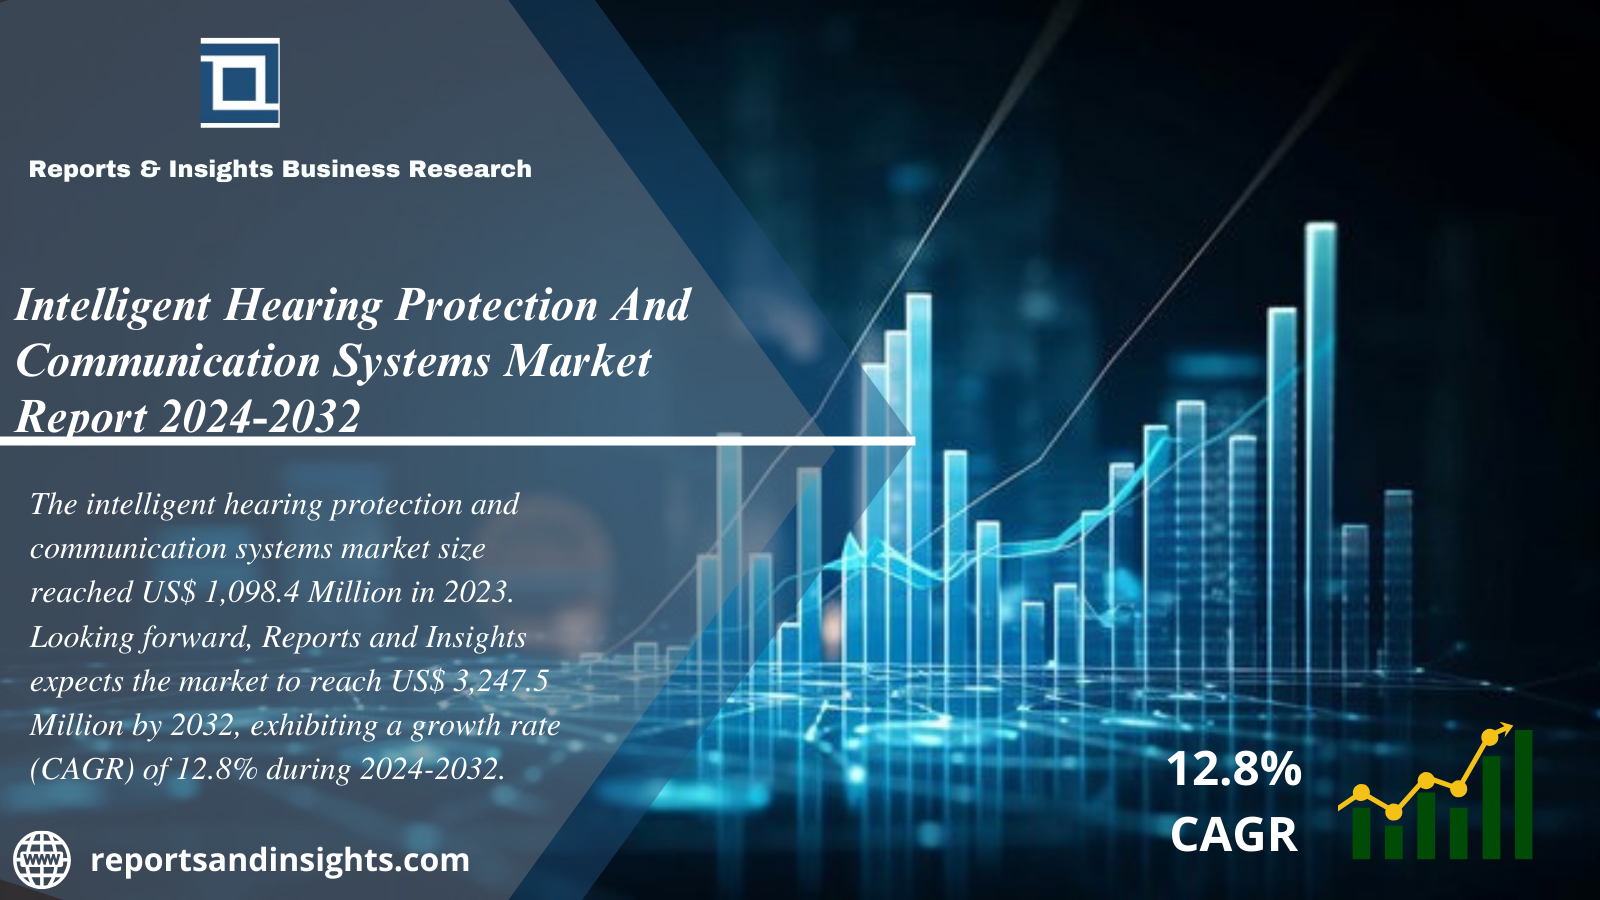 Intelligent Hearing Protection And Communication Systems Market Report 2024 to 2032: Trends, Share, Growth, Size and Industry Analysis